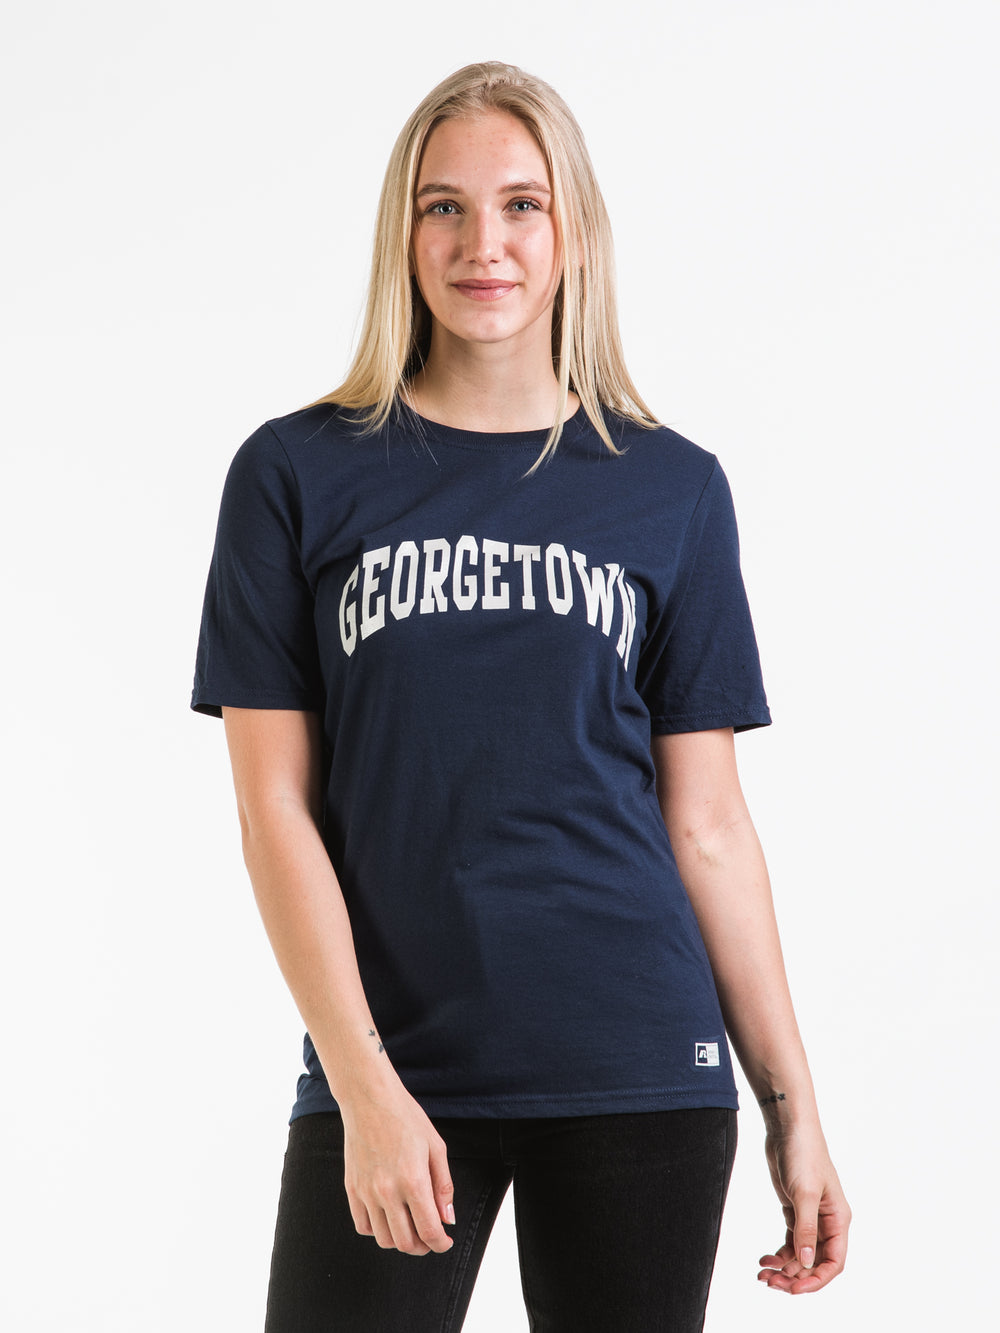 RUSSELL GEORGETOWN T-SHIRT - CLEARANCE